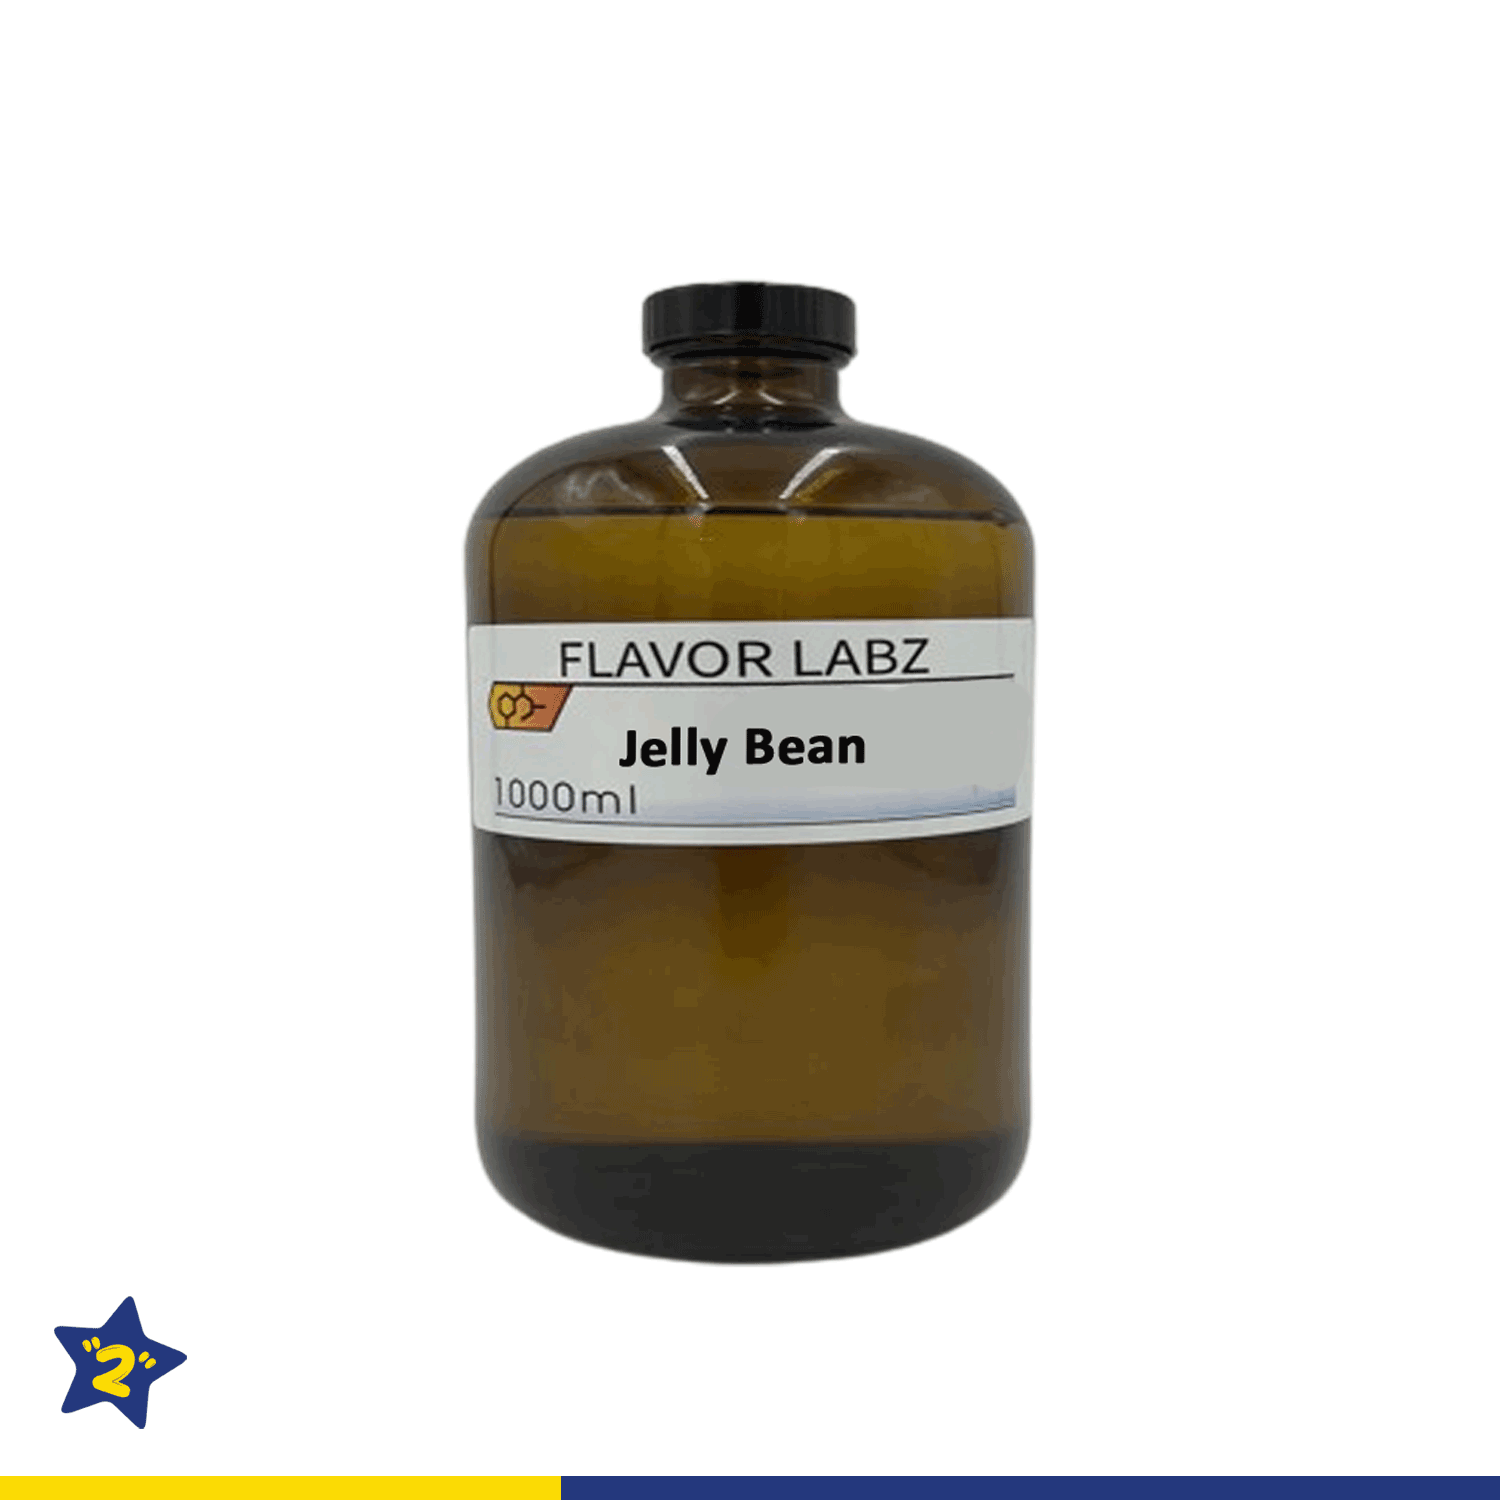 FlavorLabs Fruity Flavor Jelly Bean